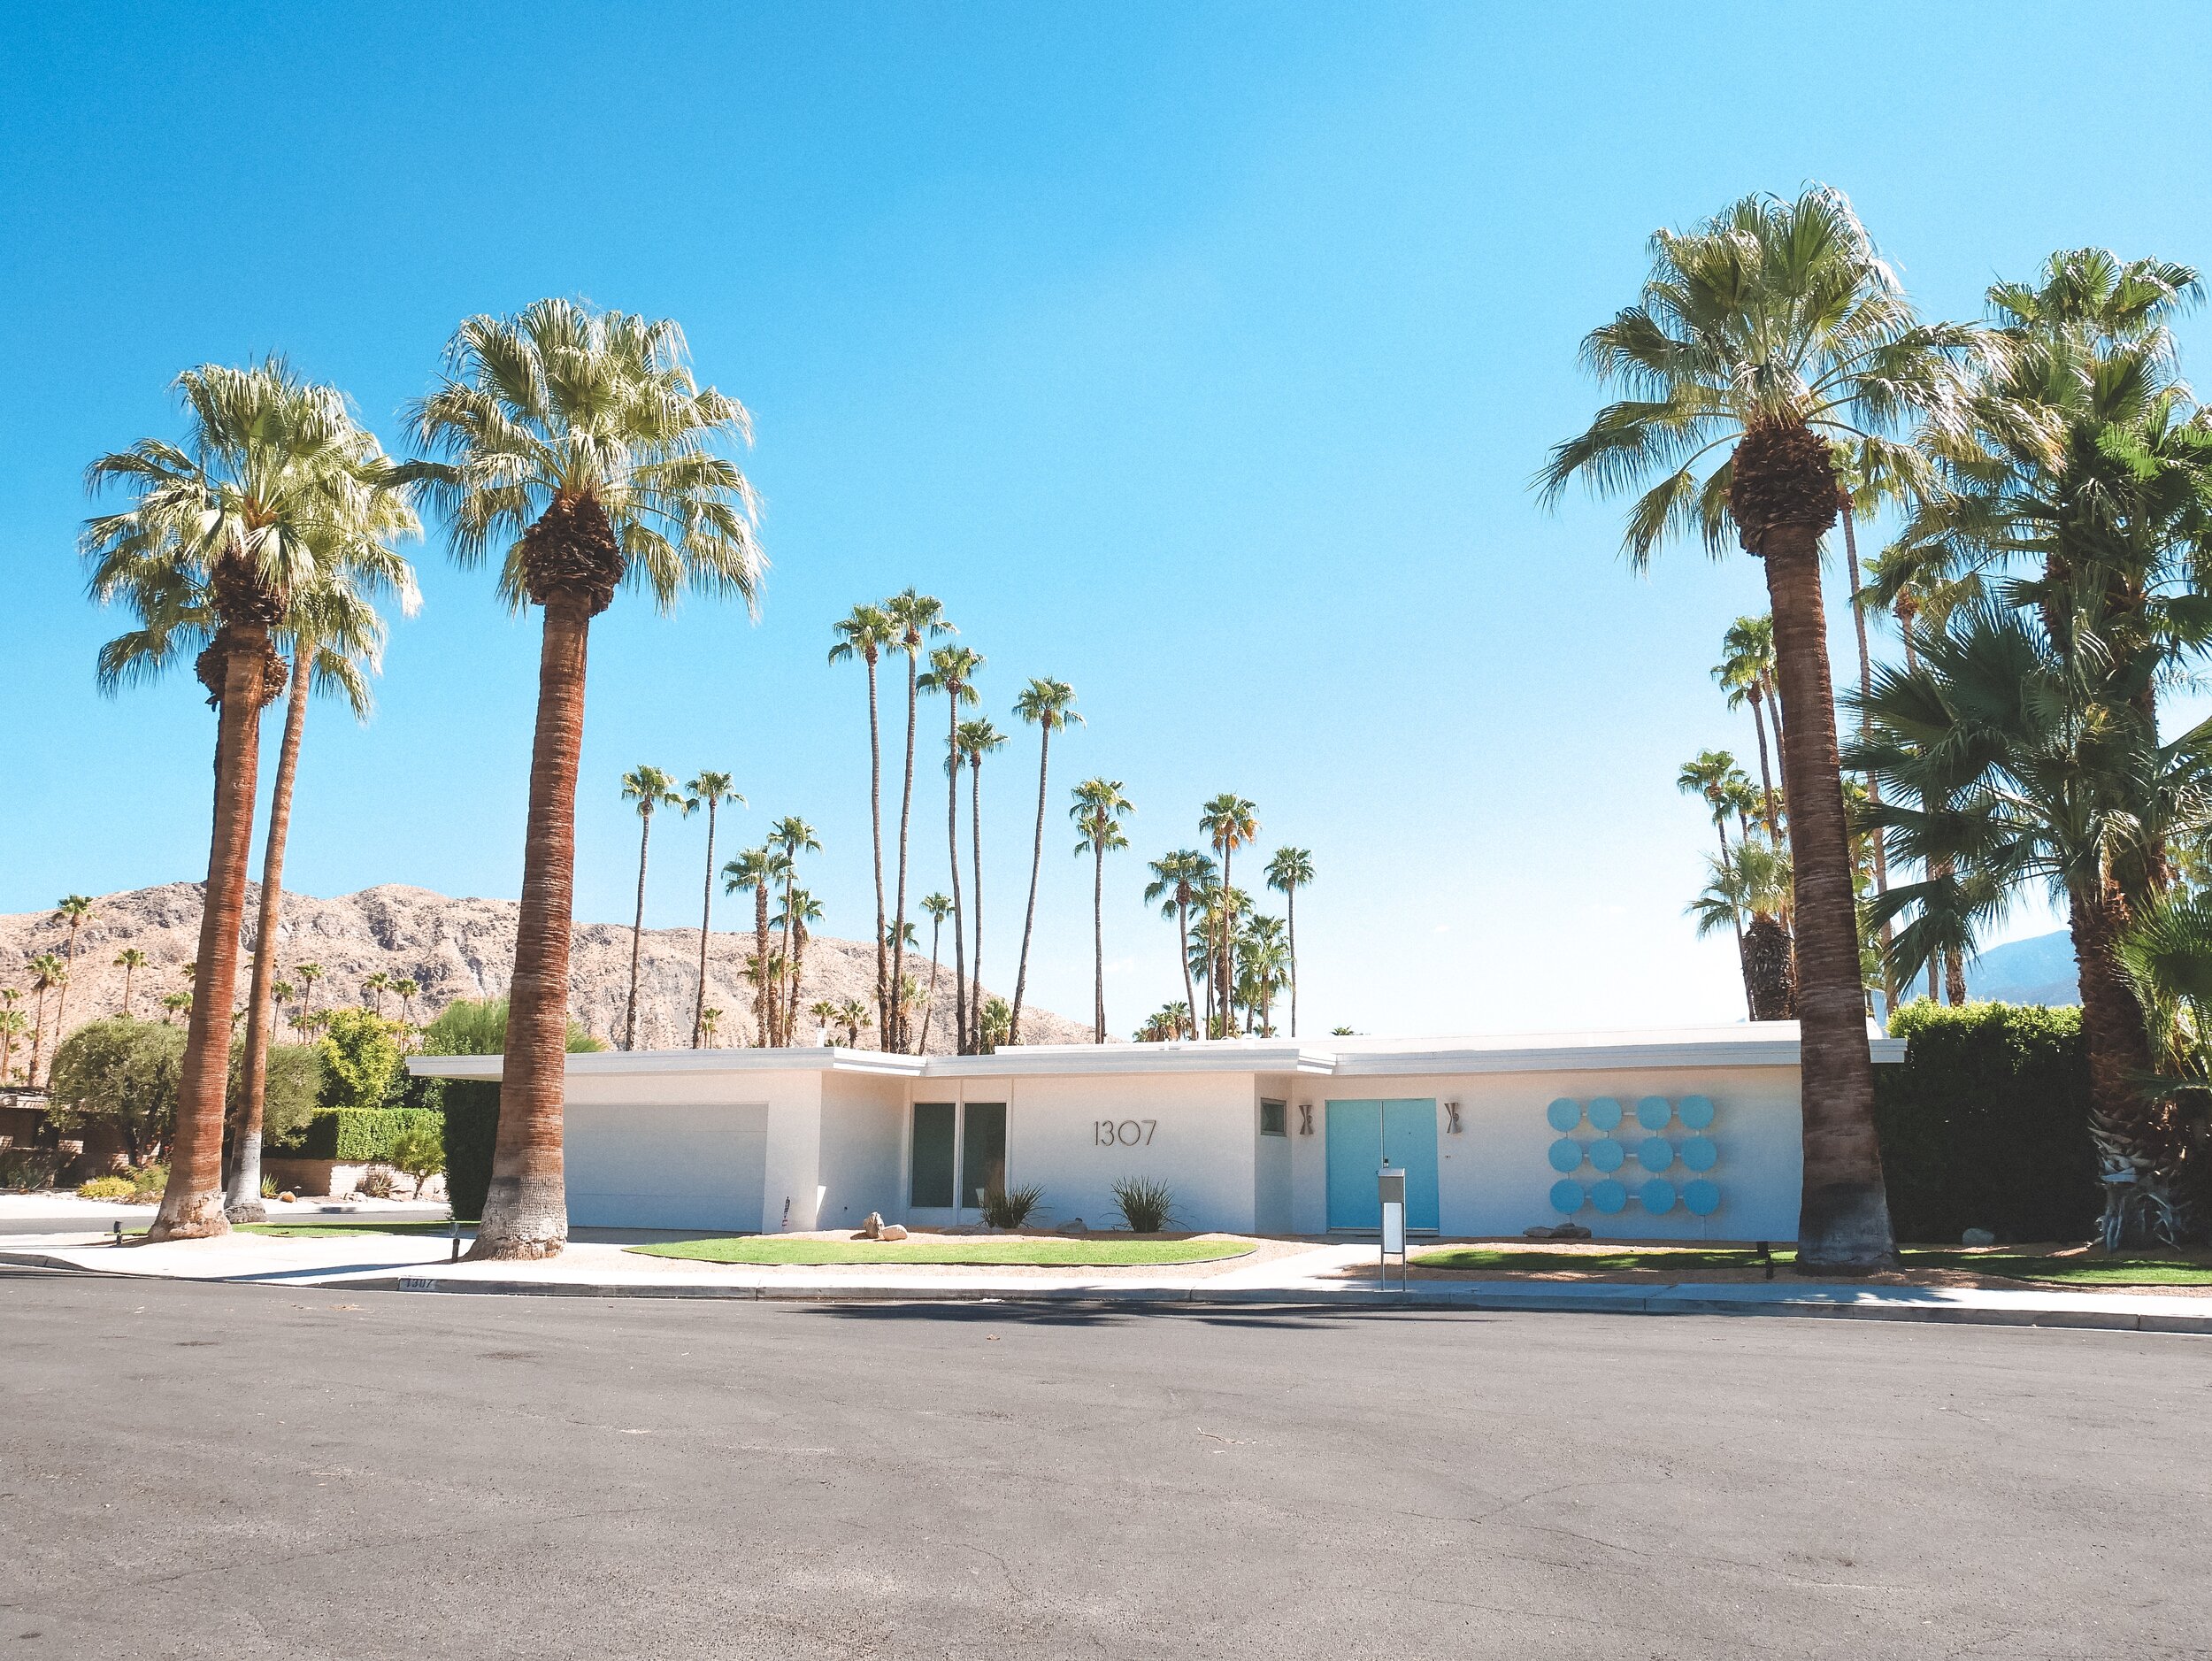 Typical Villa, Palm Springs - California - United States (USA)